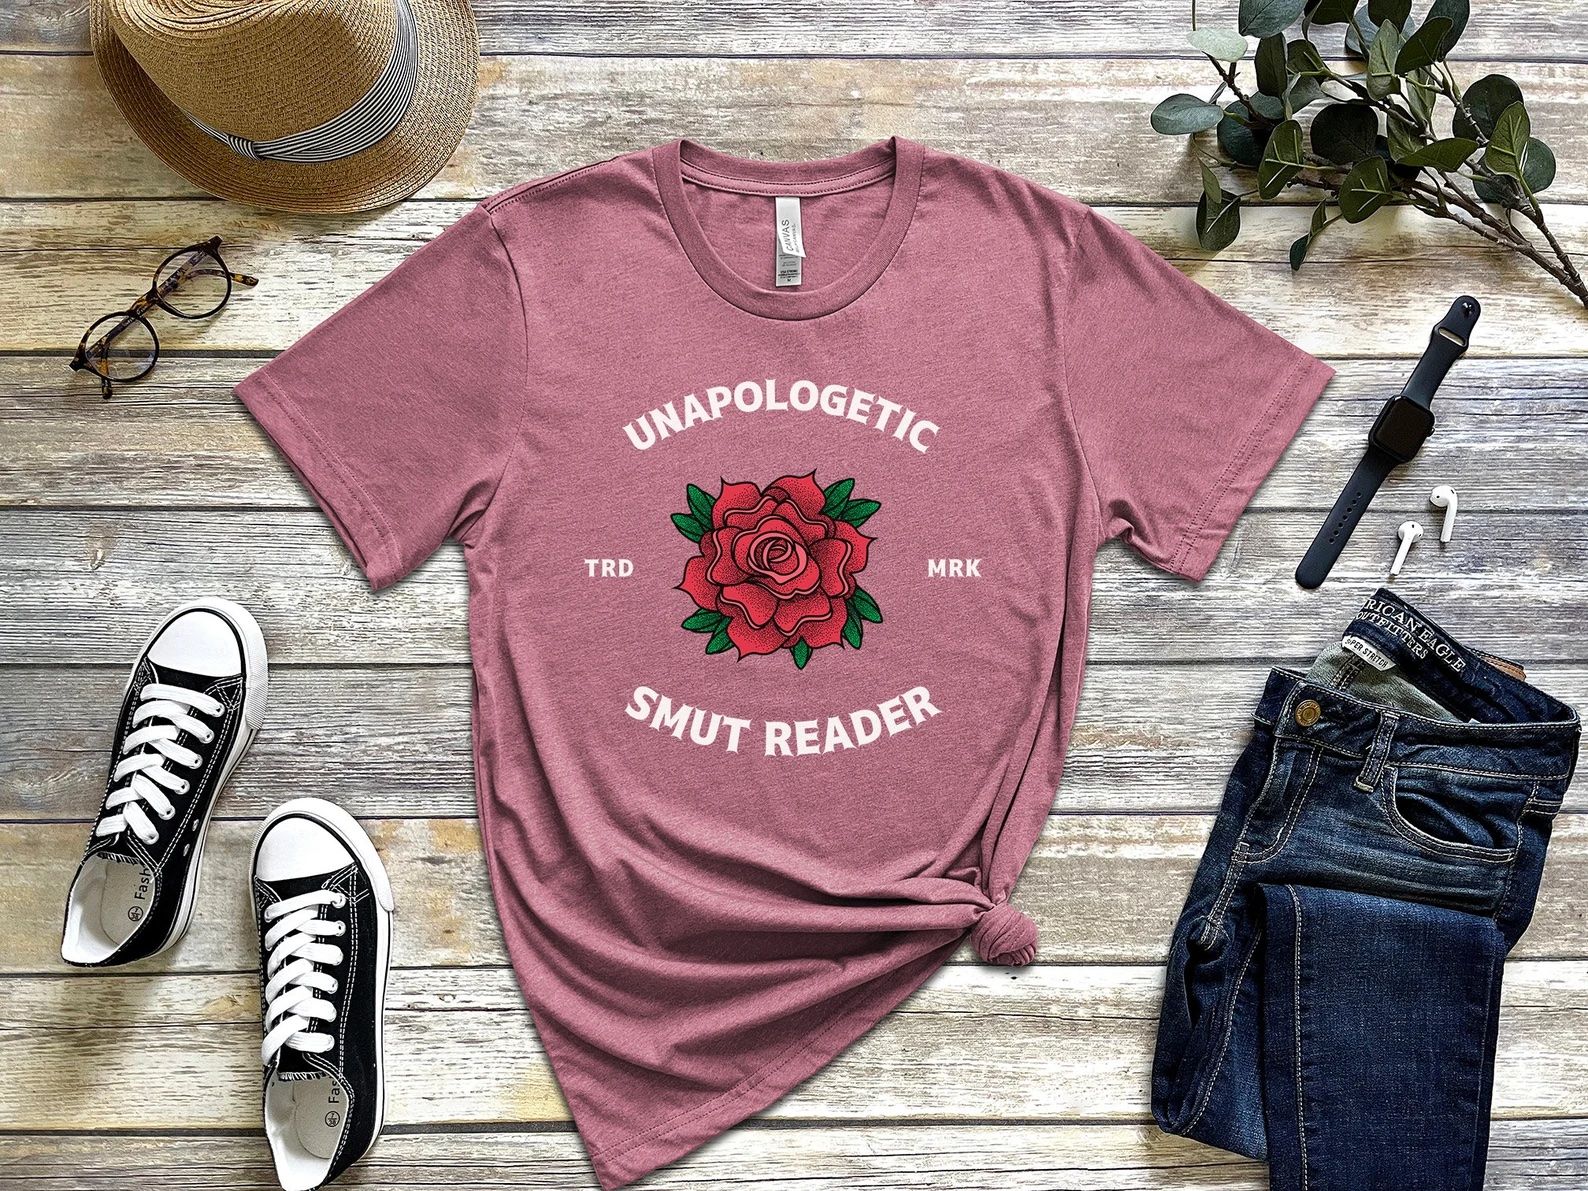 Unapologetic Smut Reader shirt